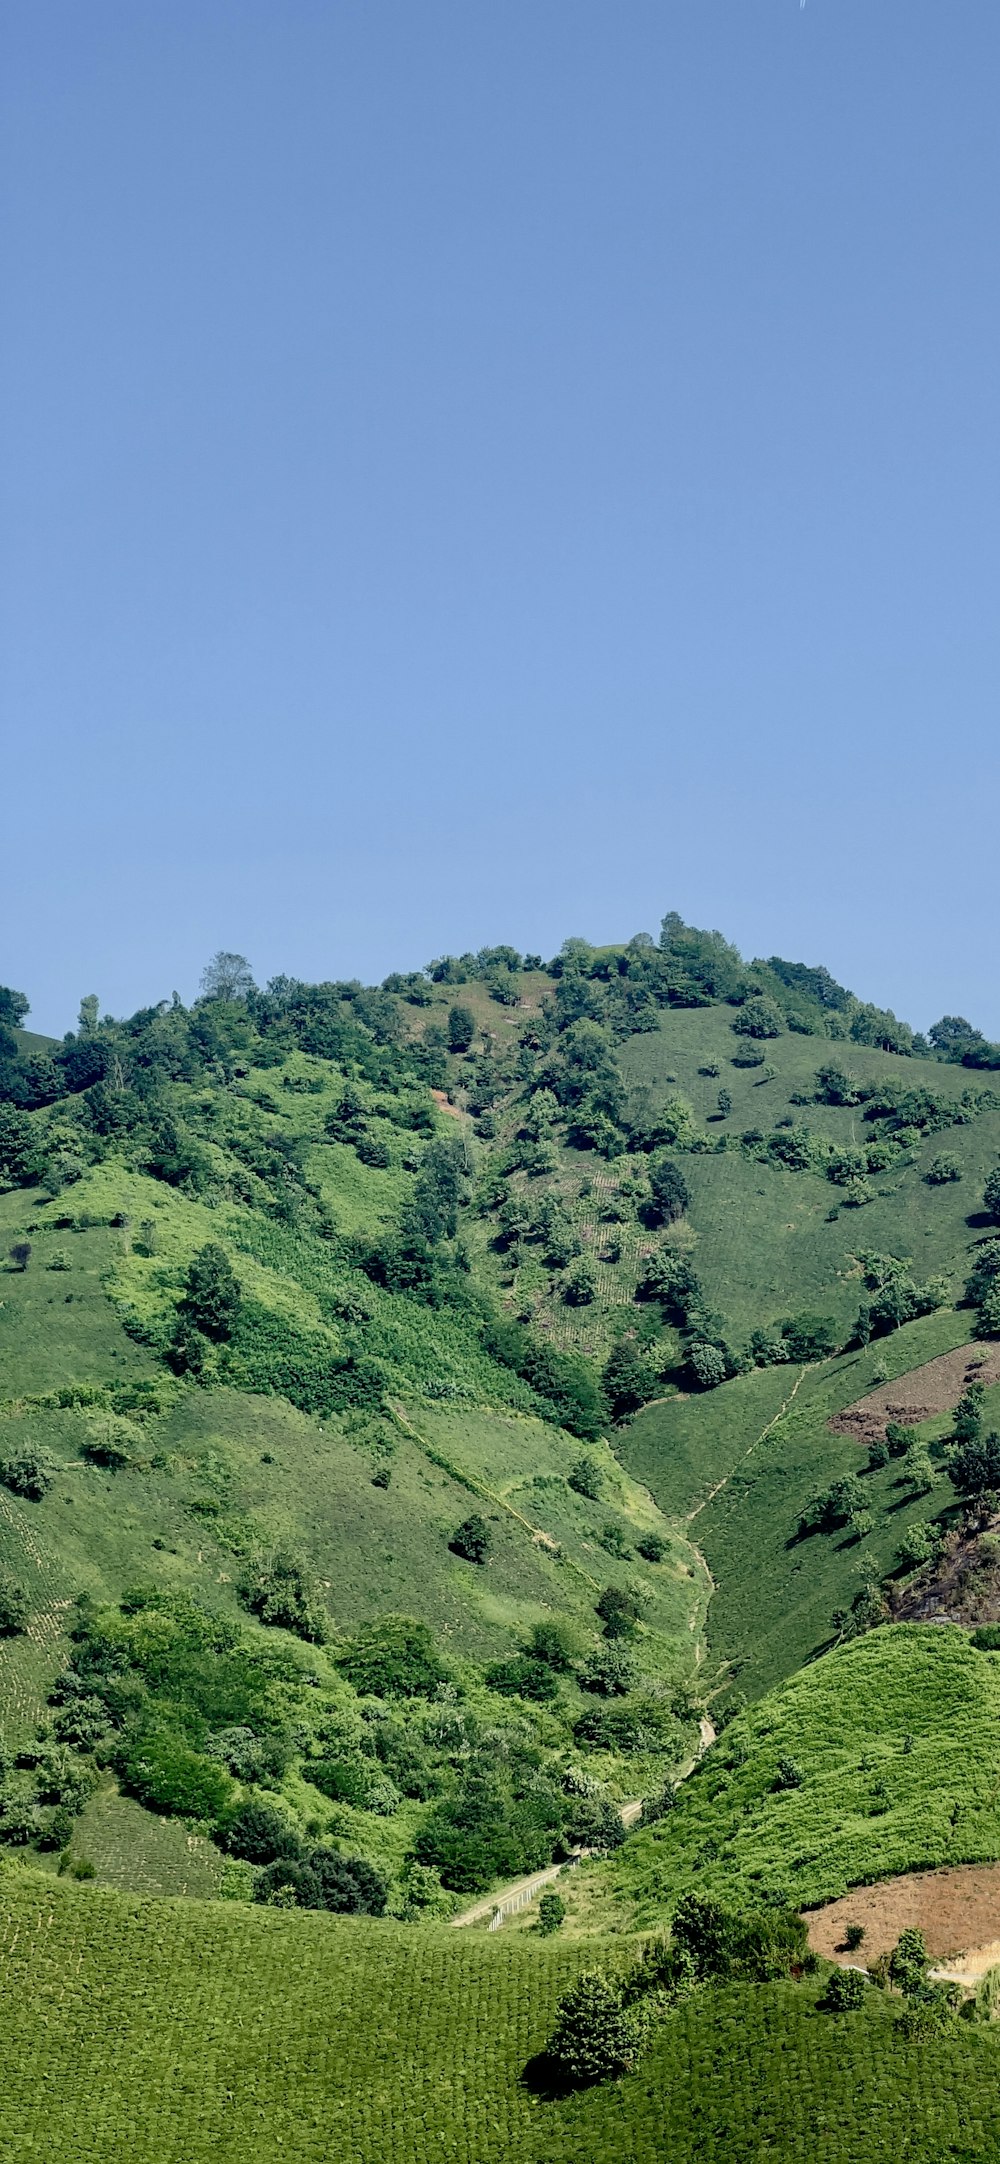 a hill covered in lush green hills under a blue sky